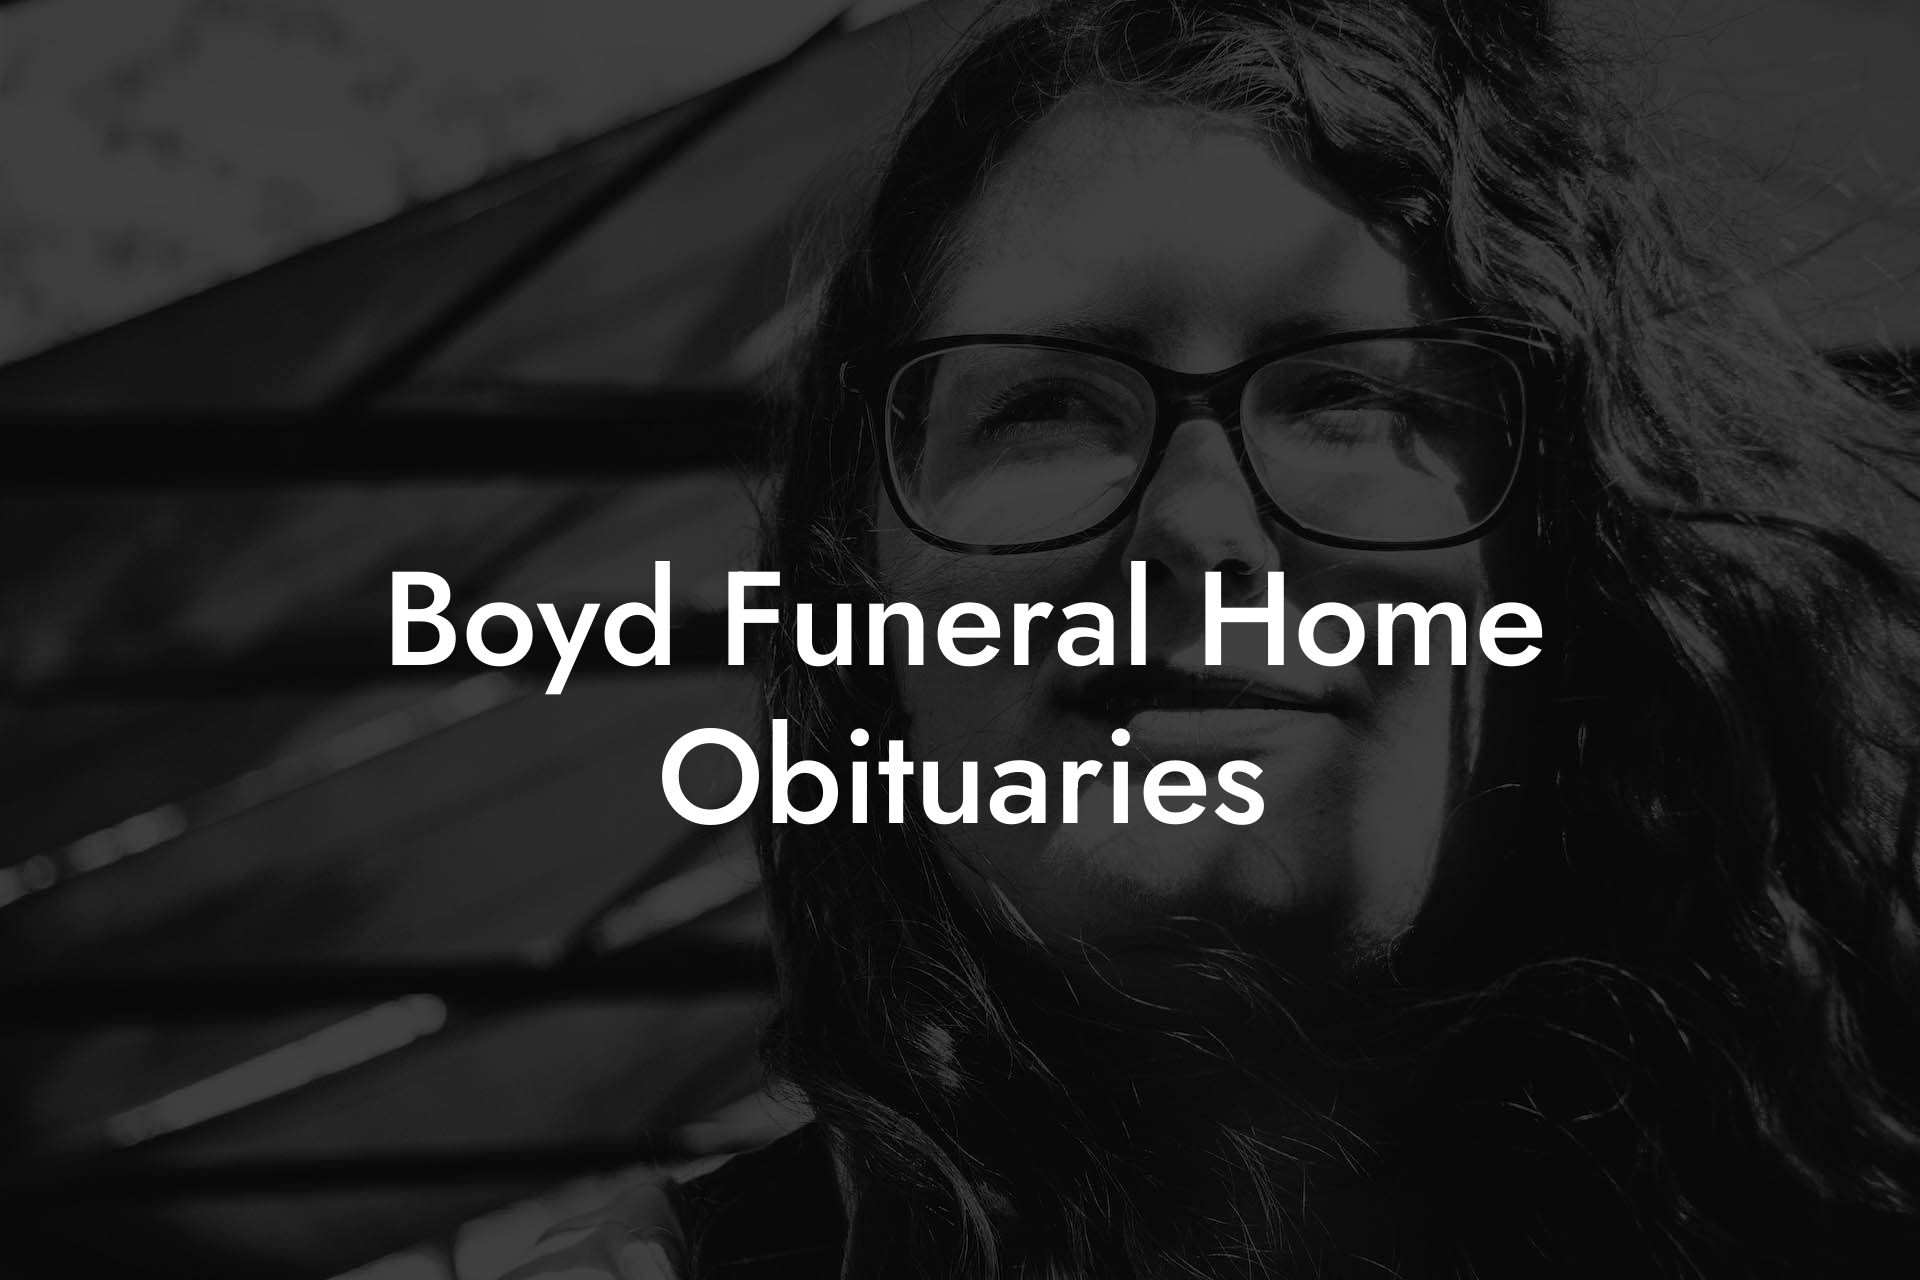 Boyd Funeral Home Obituaries